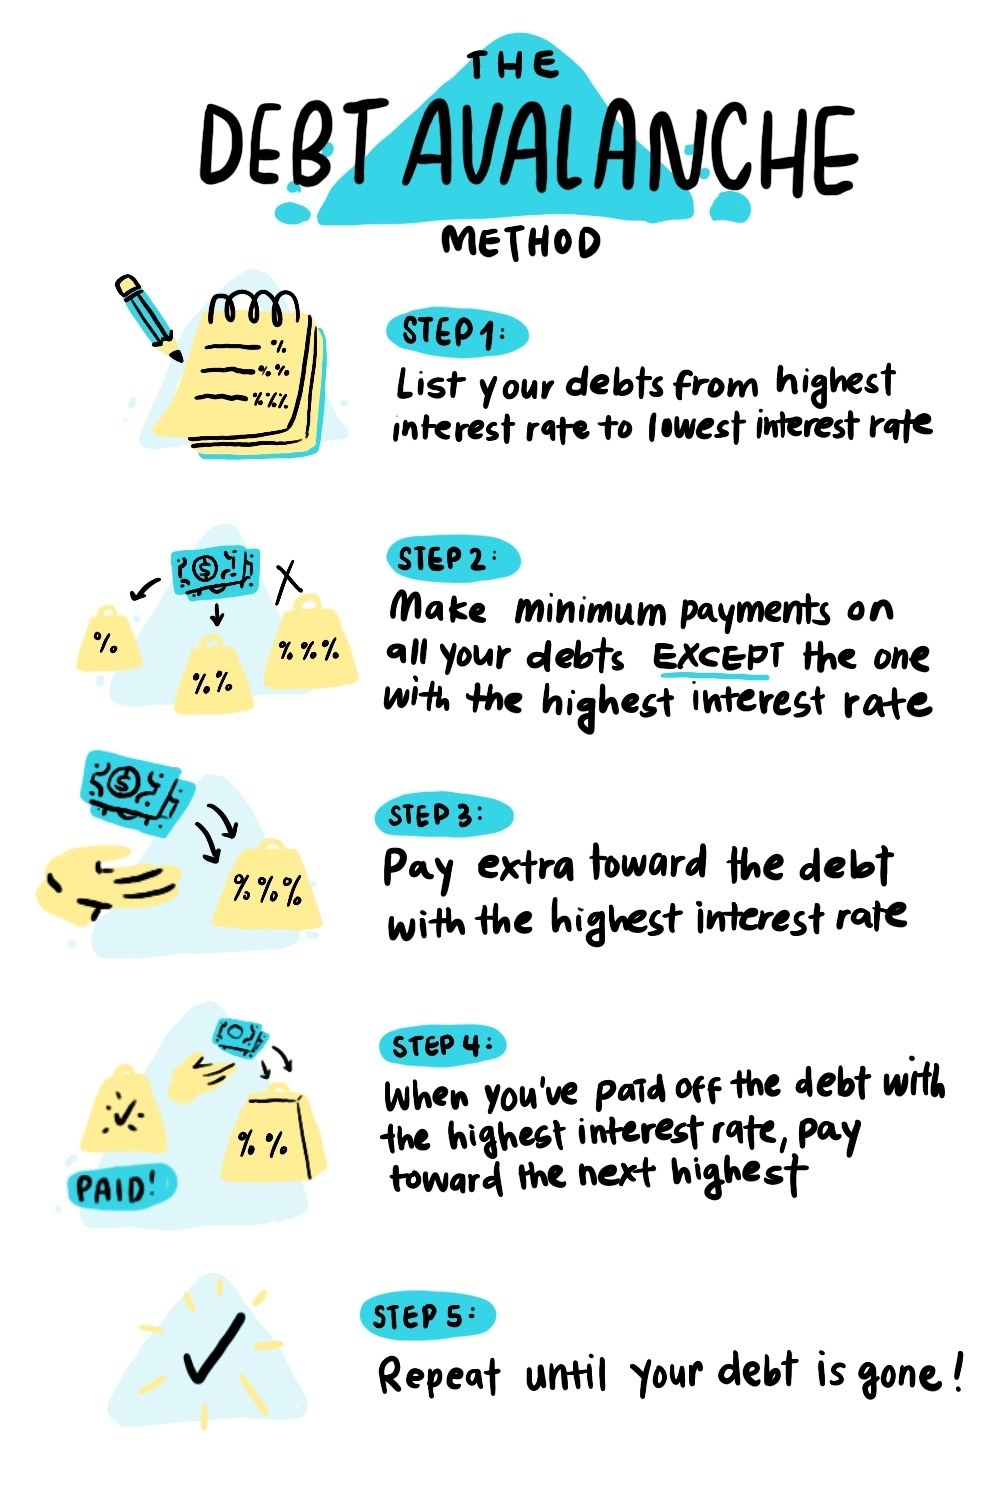 Steps for the debt avalanche method